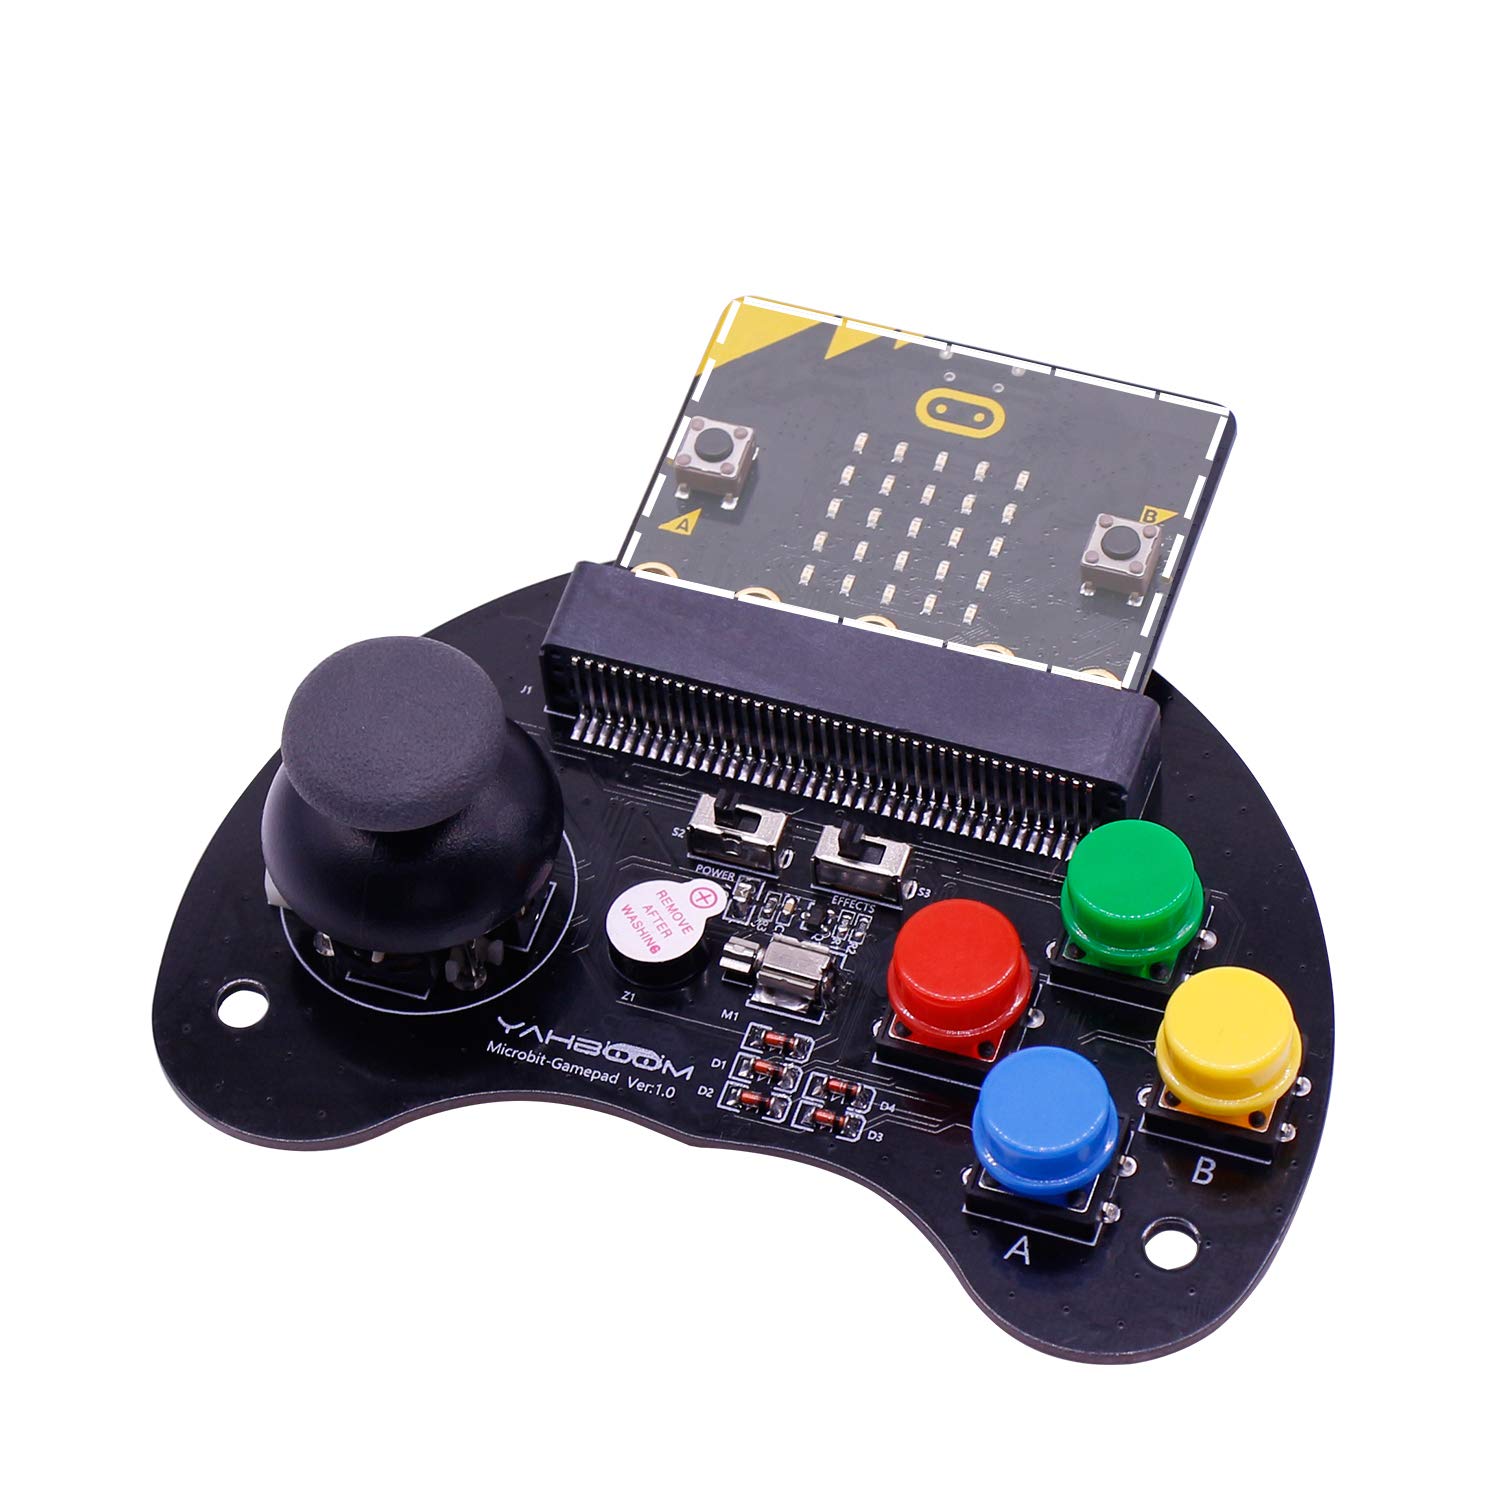 Yahboom Micro Bit Robotic Control Handle Game Joystick STEM Education Graphic Compatible with Micro:bit V2 V1.5 for Kids (Without Microbit) (Handle Without microbit v2)